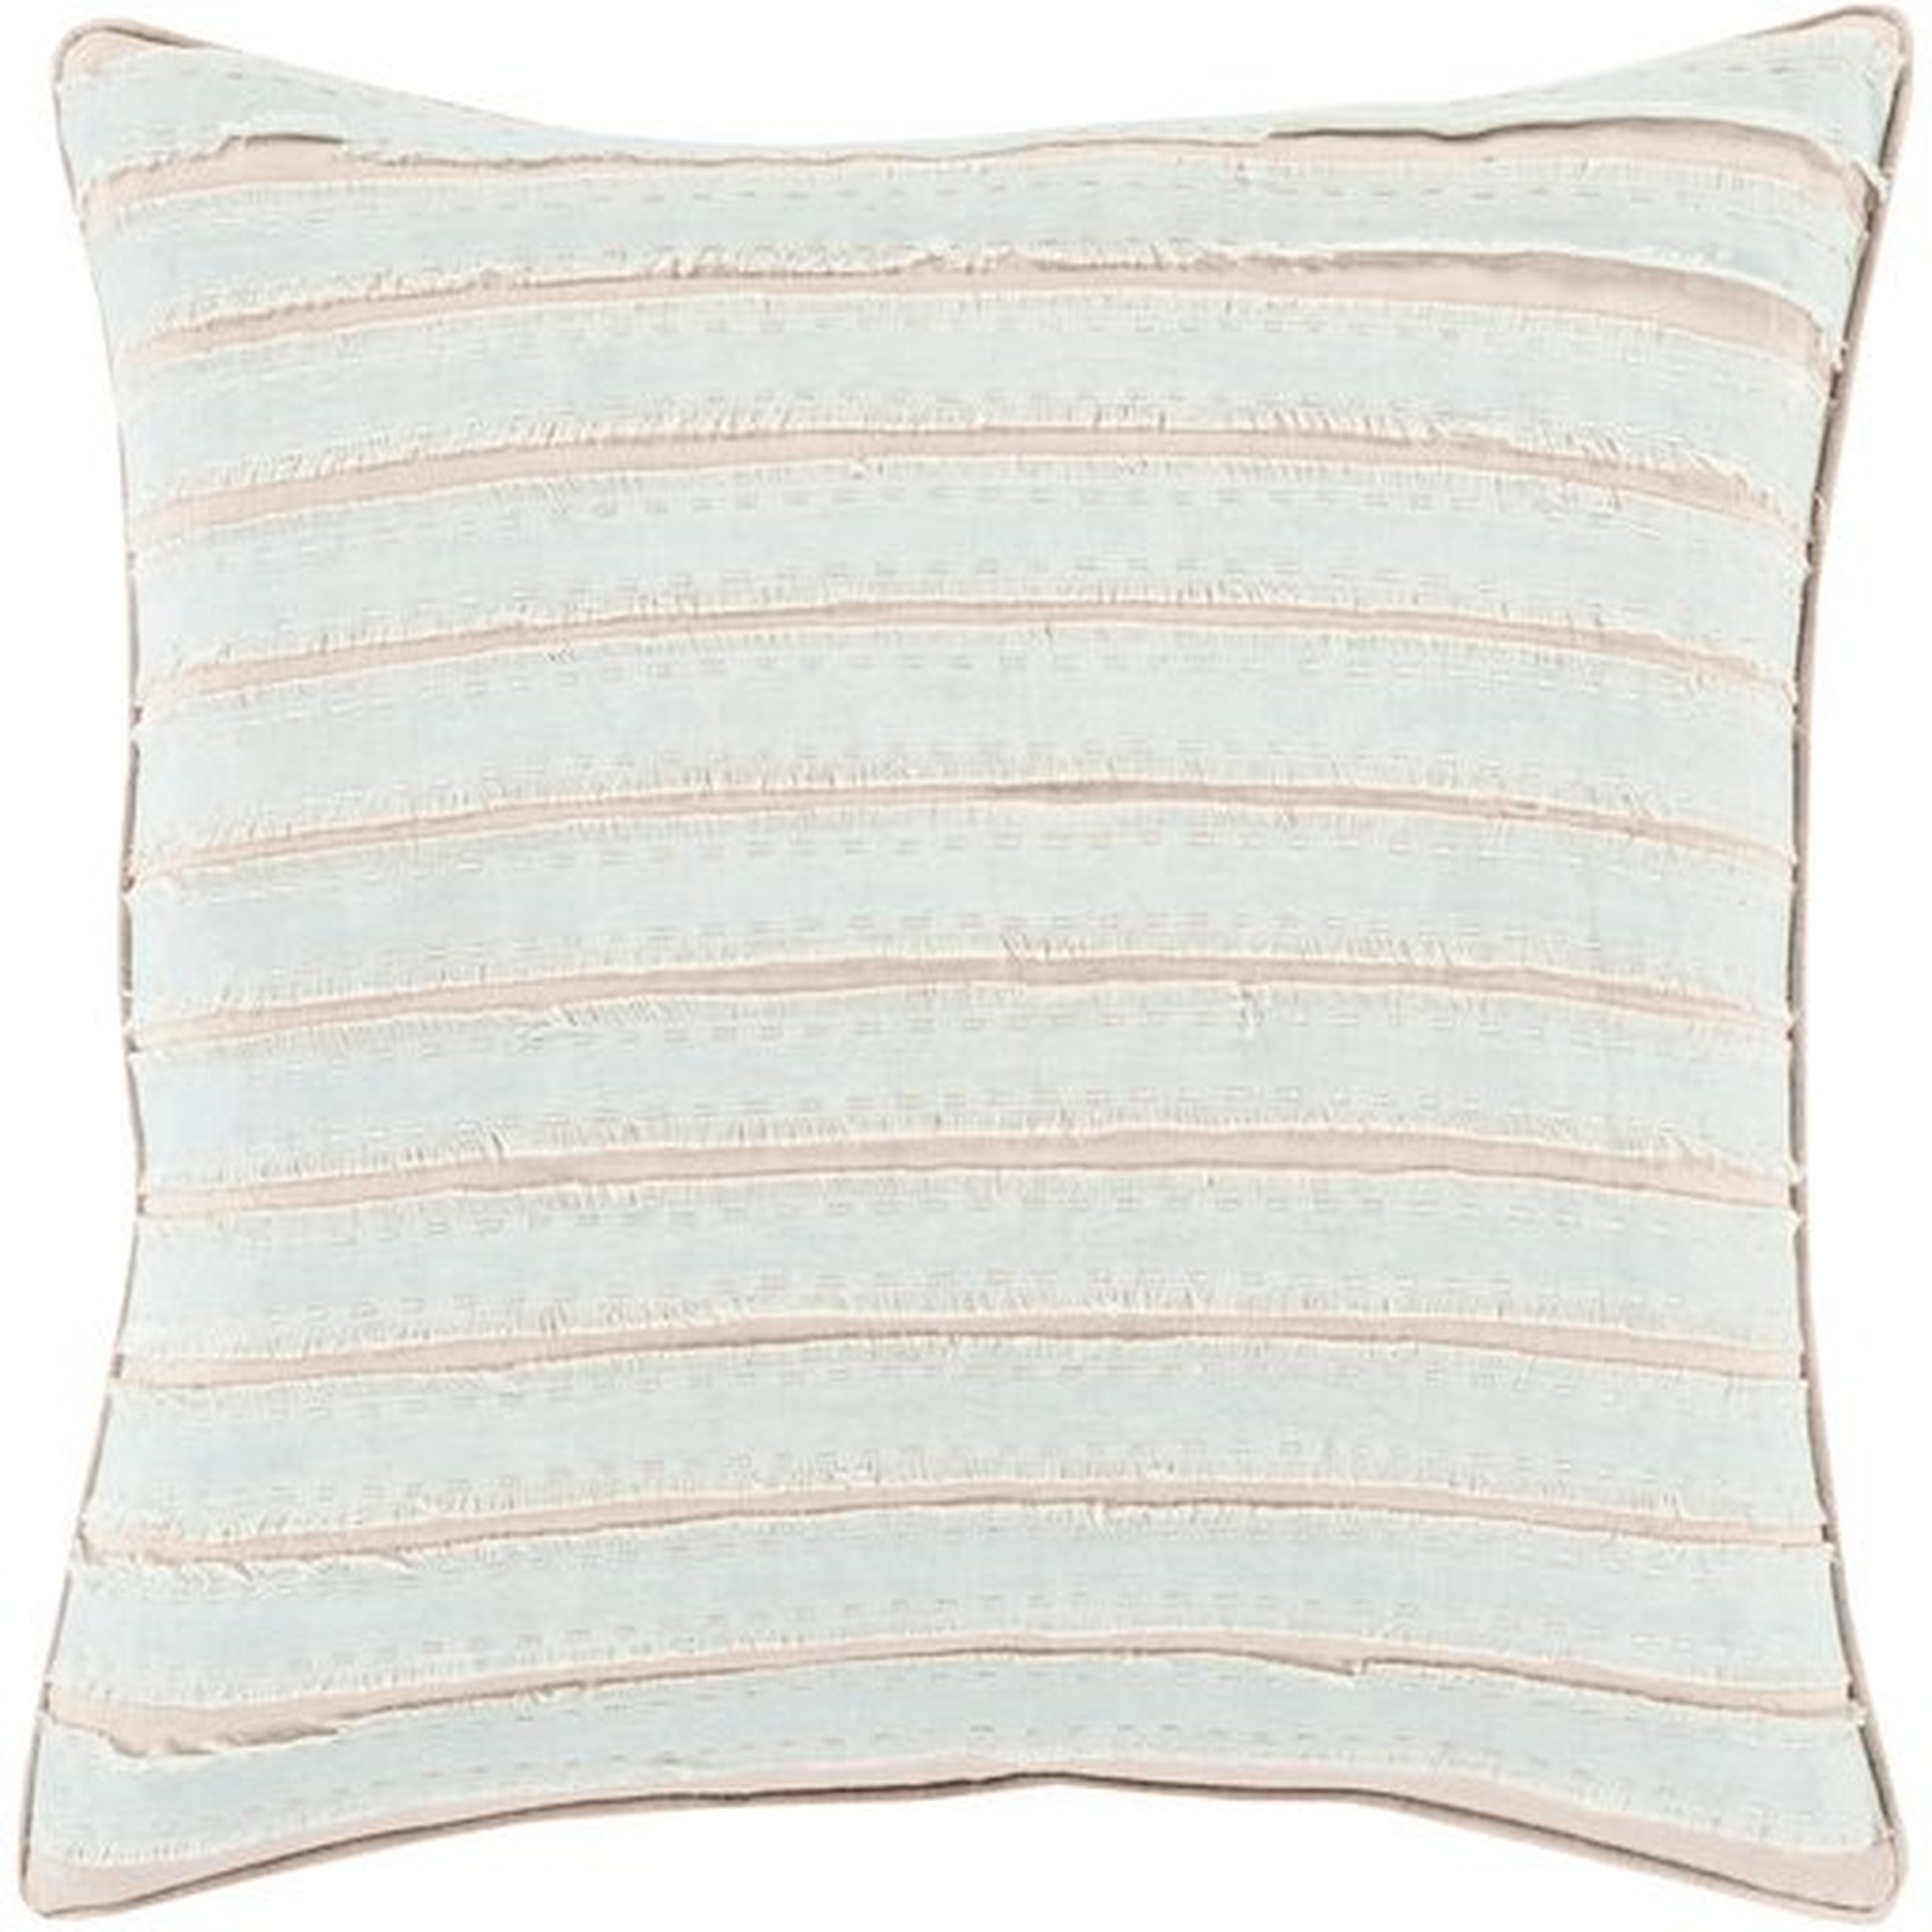 Willow Throw Pillow, 22" x 22", with poly insert - Surya